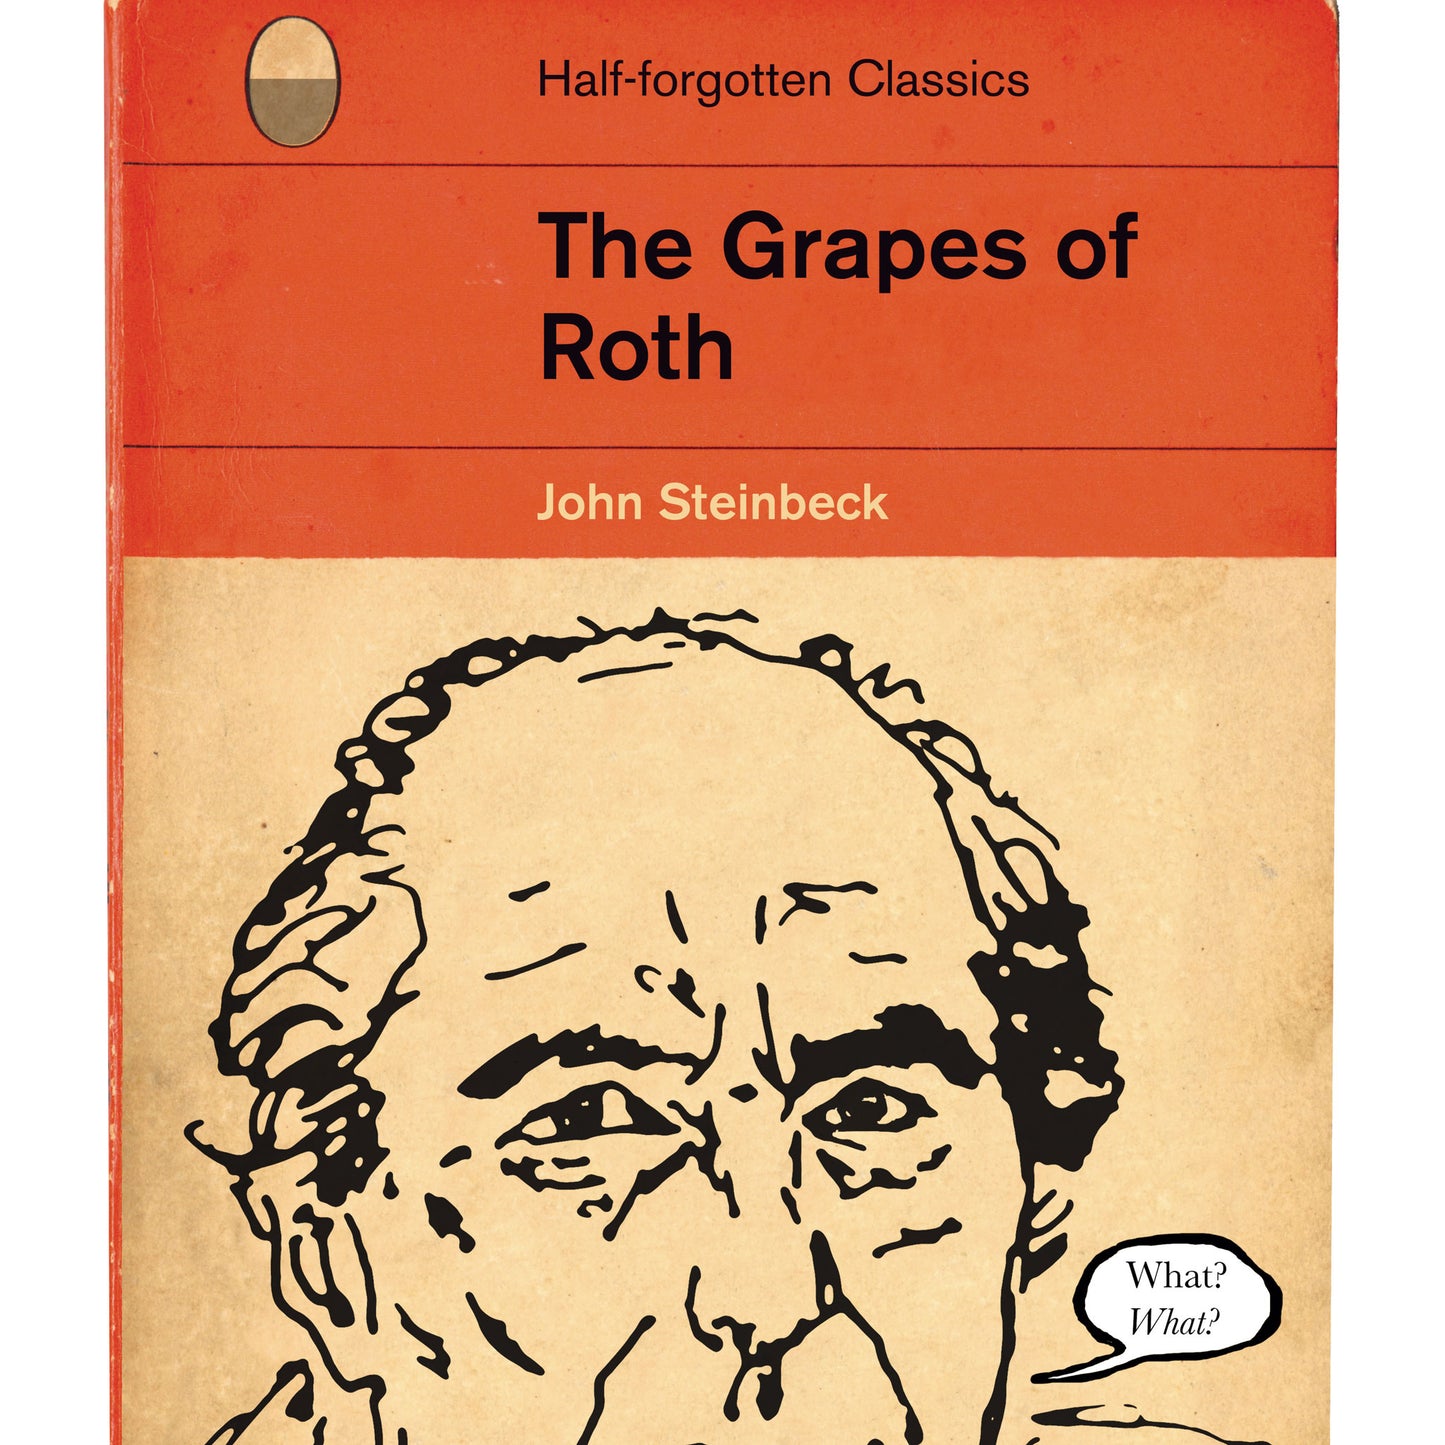 John Steinbeck 'The Grapes Of Wrath' Book Cover Poster Print